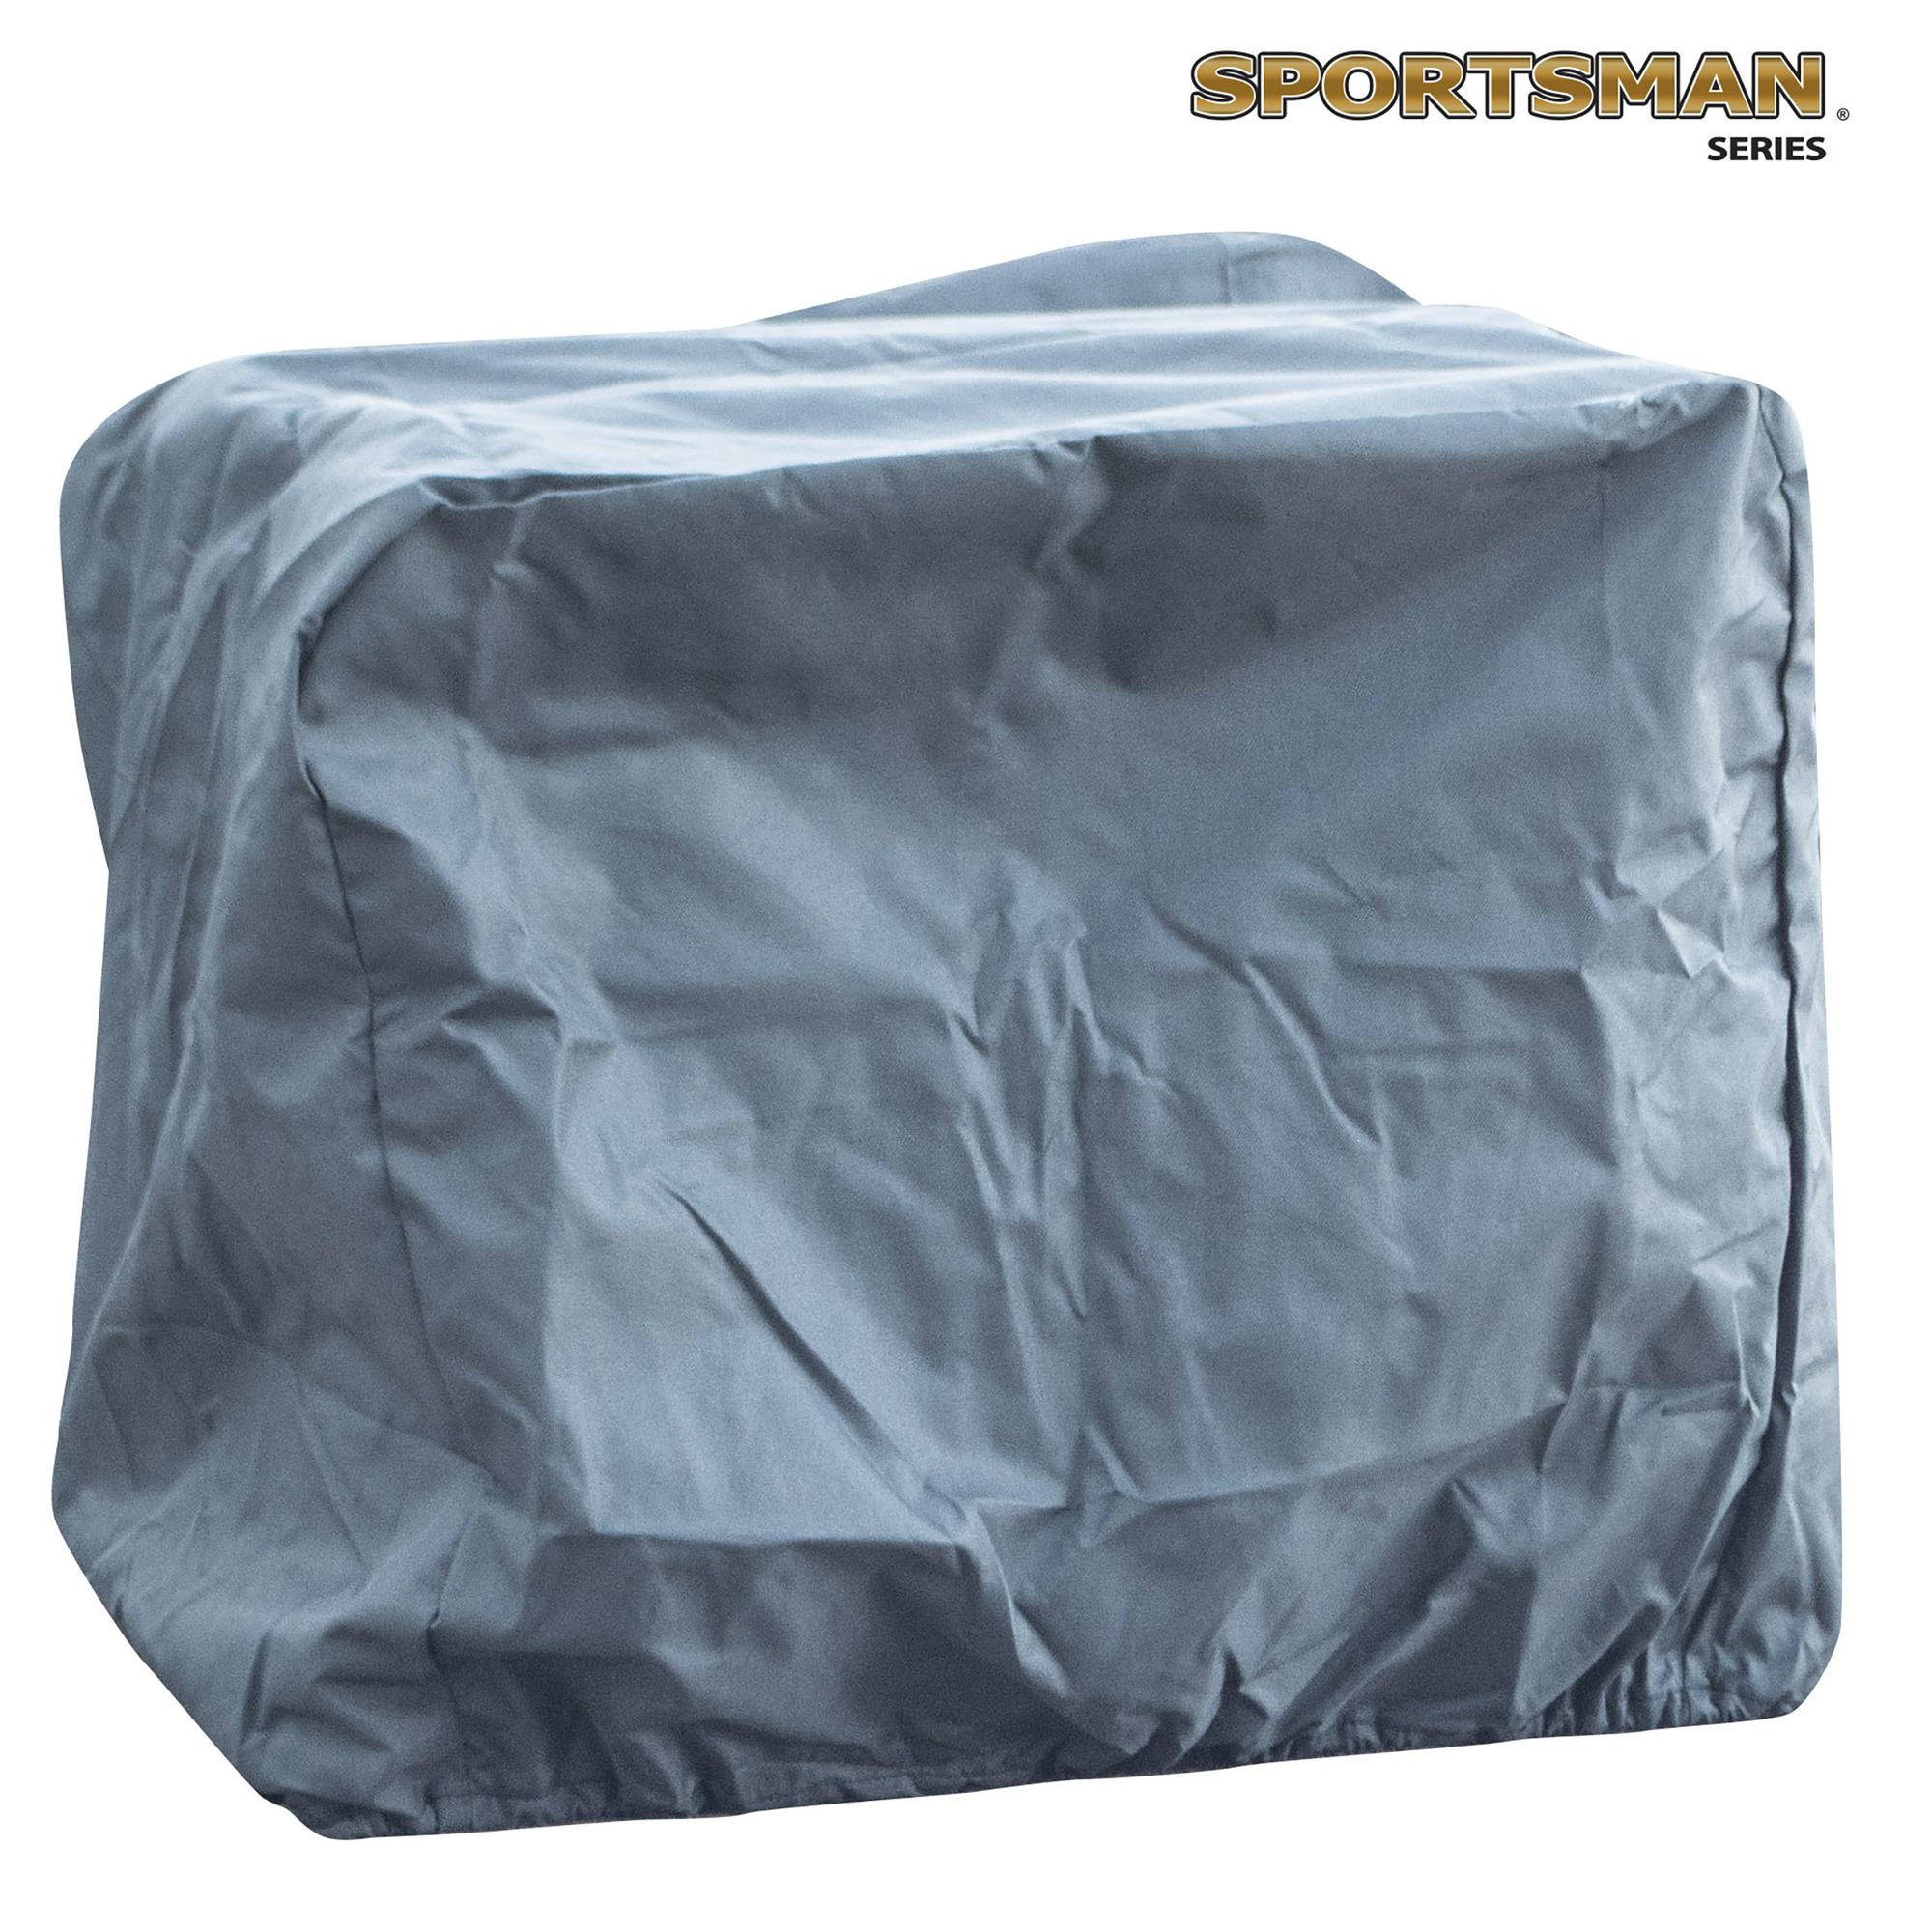 Sportsman Series, Generator Cover for 3500 Watt Sportsman Generators, Material Polyester, Closure Type Elastic, Compatible With Other, Model